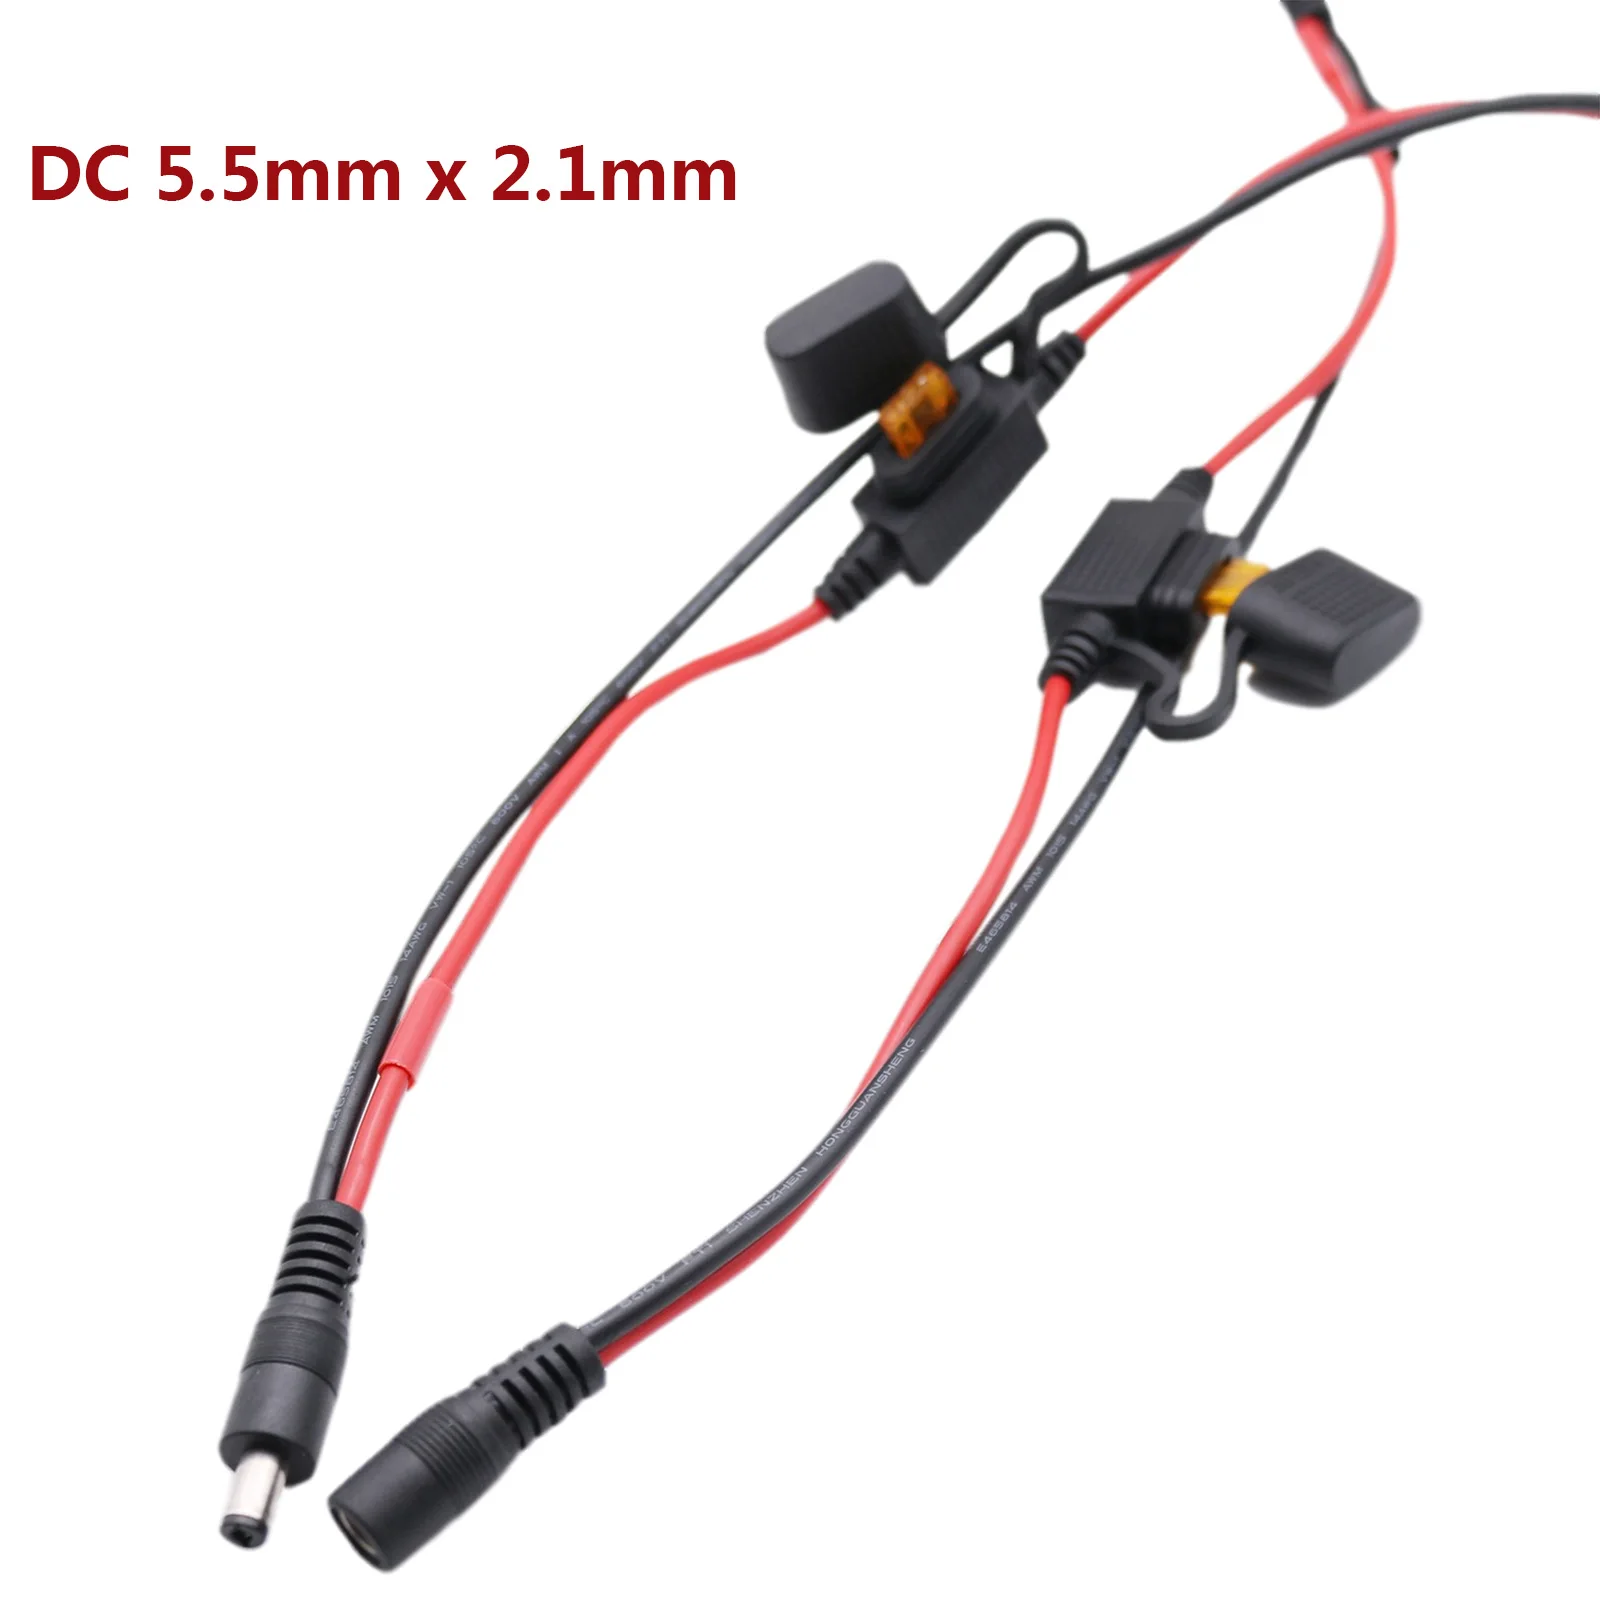 DC 5.5/2.1 Alligator Clips External Power Cable 10amps fuse for TOPCON GPS Power 